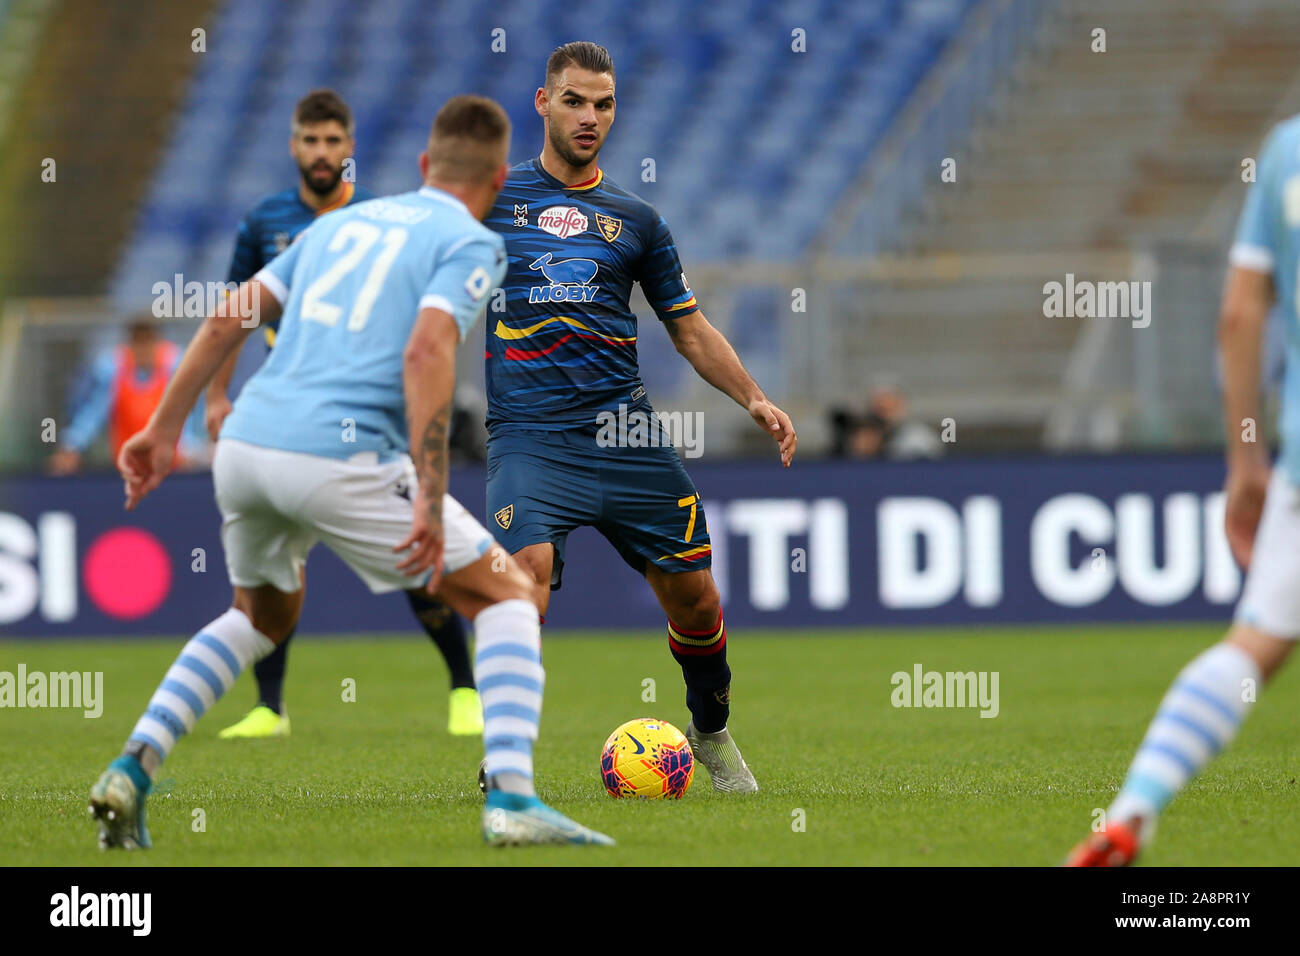 Rome, Italy. 10th Nov, 2019. Panagiotis Tachtsidis (Lecce) in action during the Serie A TIM match between SS Lazio and US Lecce at Stadio Olimpico on November 10, 2019 in Rome, Italy. Lazio beat Lecce by 4-2 during the 12th round of Serie A TIM (Photo by Giuseppe Fama/Pacific Press) Credit: Pacific Press Agency/Alamy Live News Stock Photo